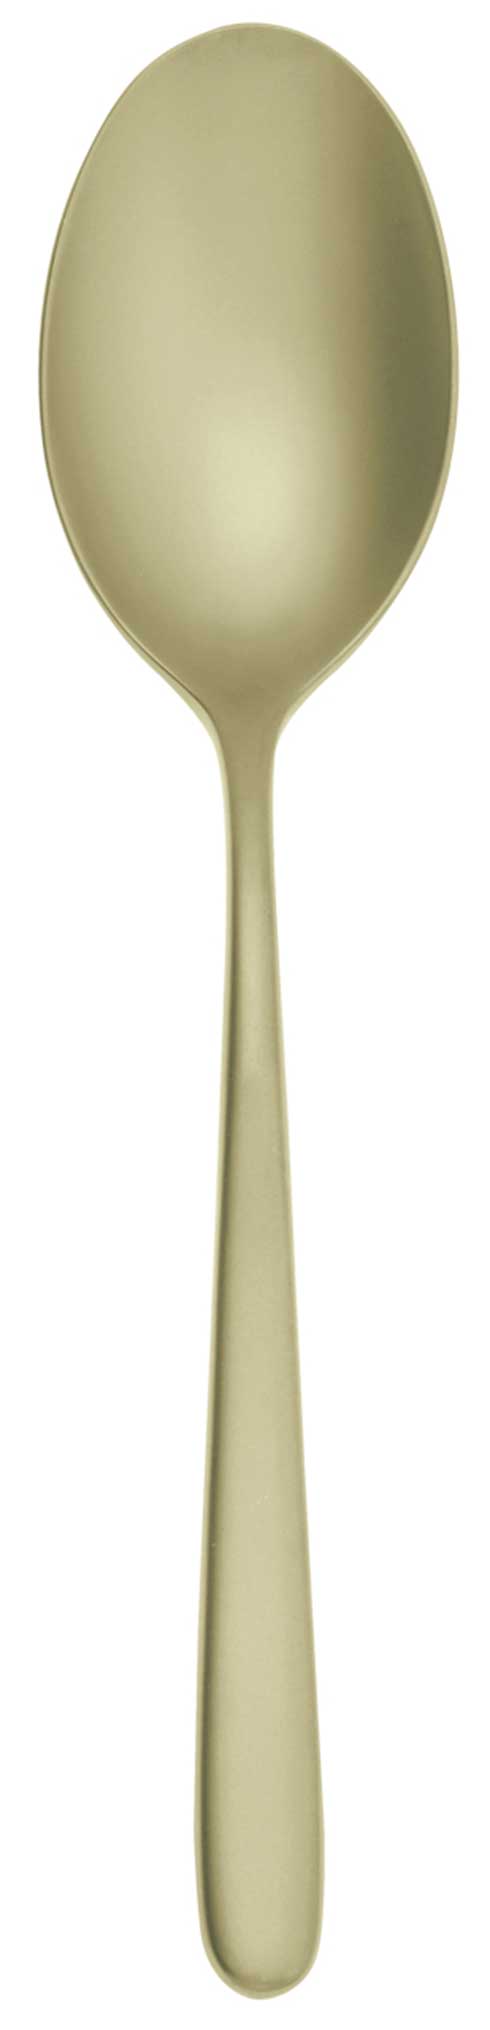 $57.00 Champagne Antico - Serving Spoon 18/10 s/s Sand Blasted Finish - PVD Champagne